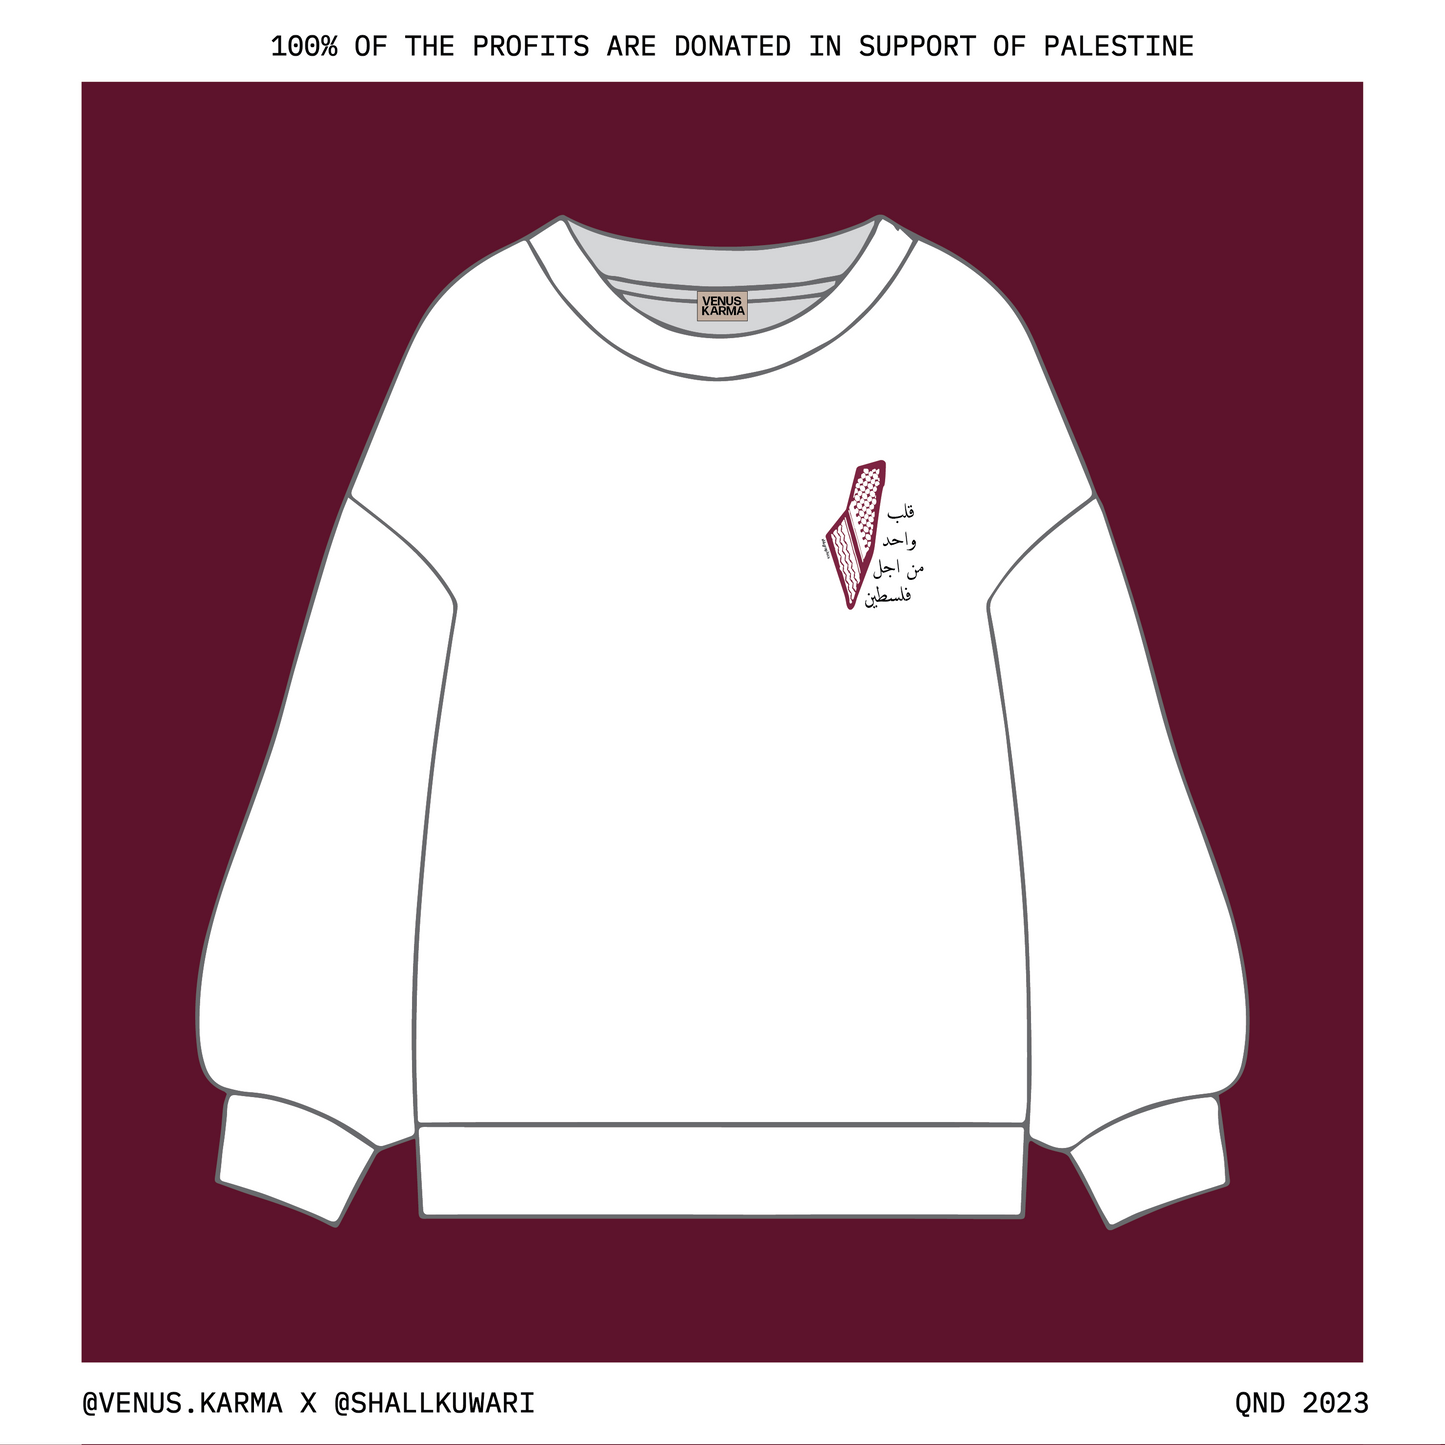 "UNITED FOR PEACE IN PALESTINE" WHITE SWEATSHIRT